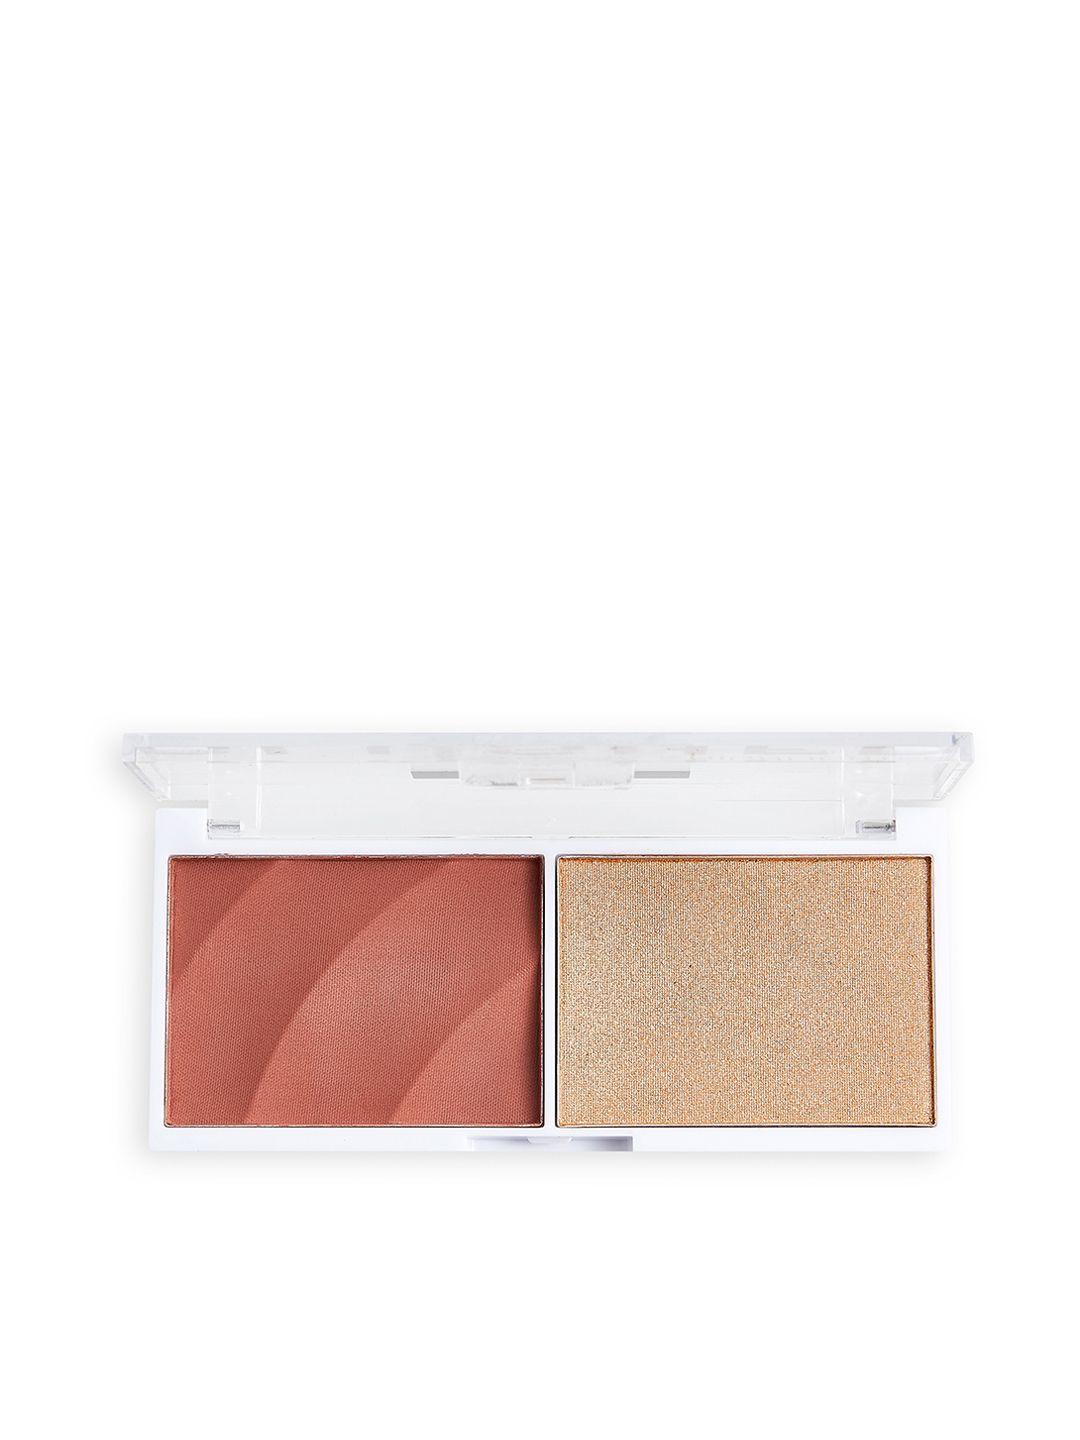 makeup revolution london colour play duo blush & highlighter - kindness